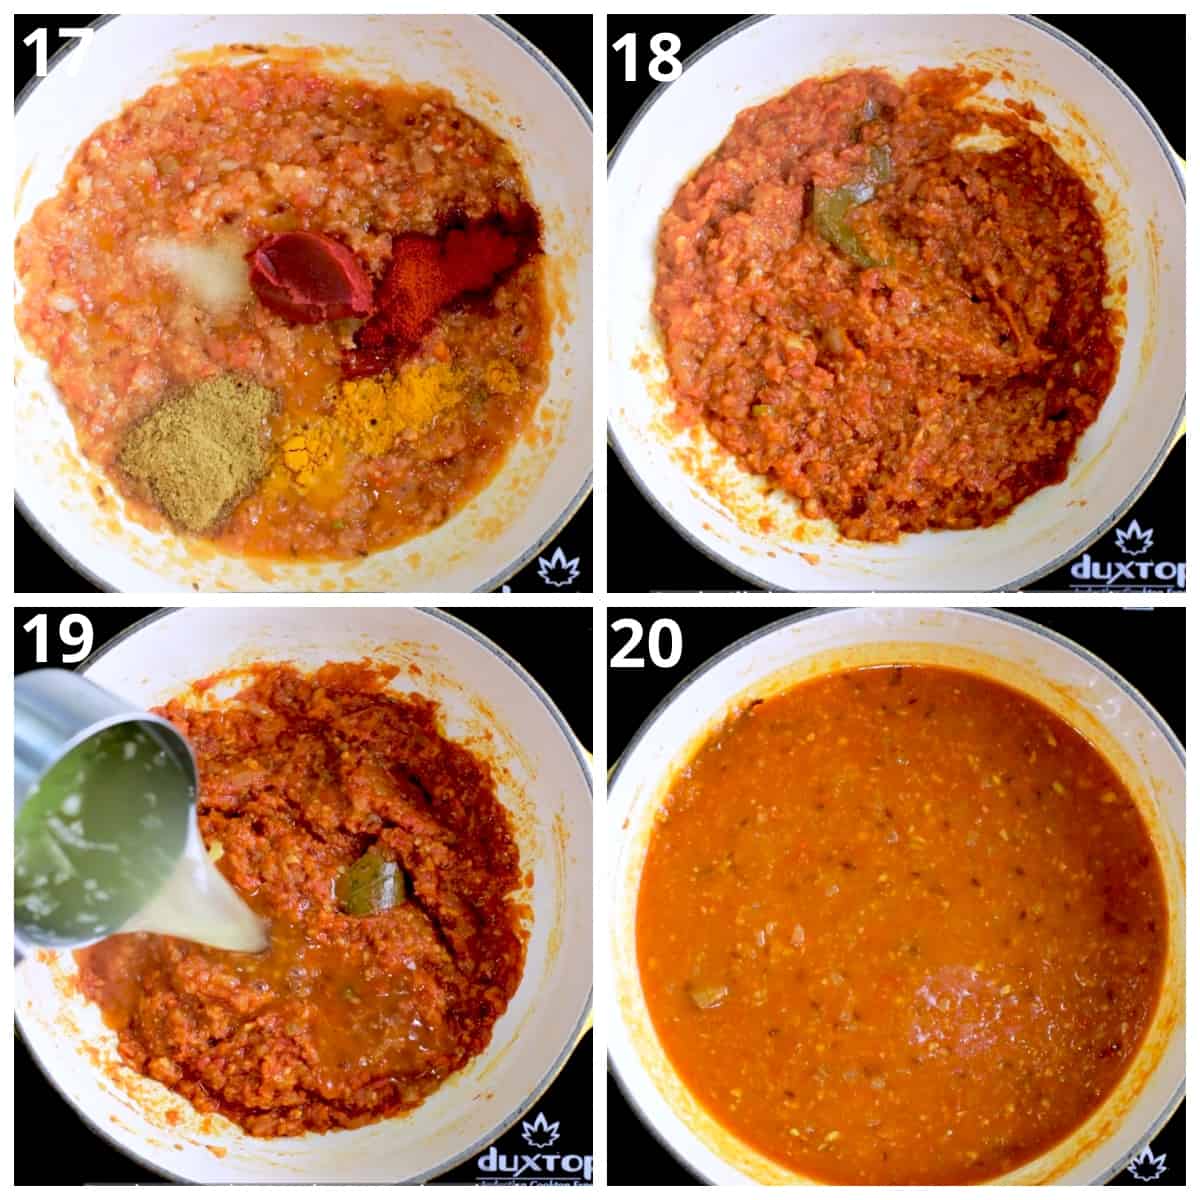 Step by step photos to show how to make the curry.